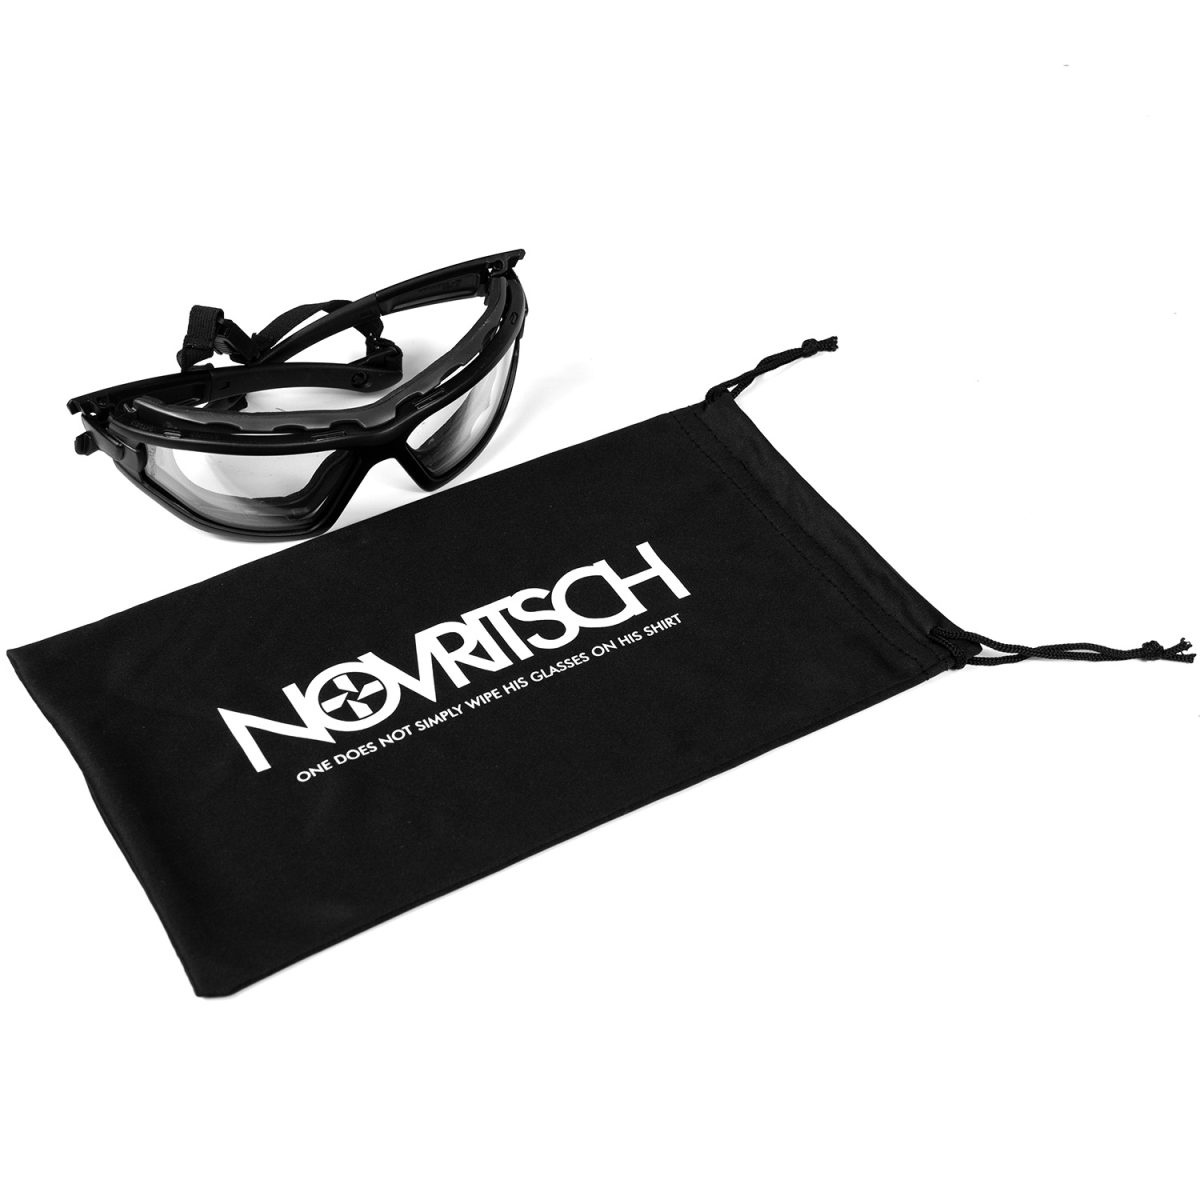 Novritsch Antifog Safety Goggles - Low Profile